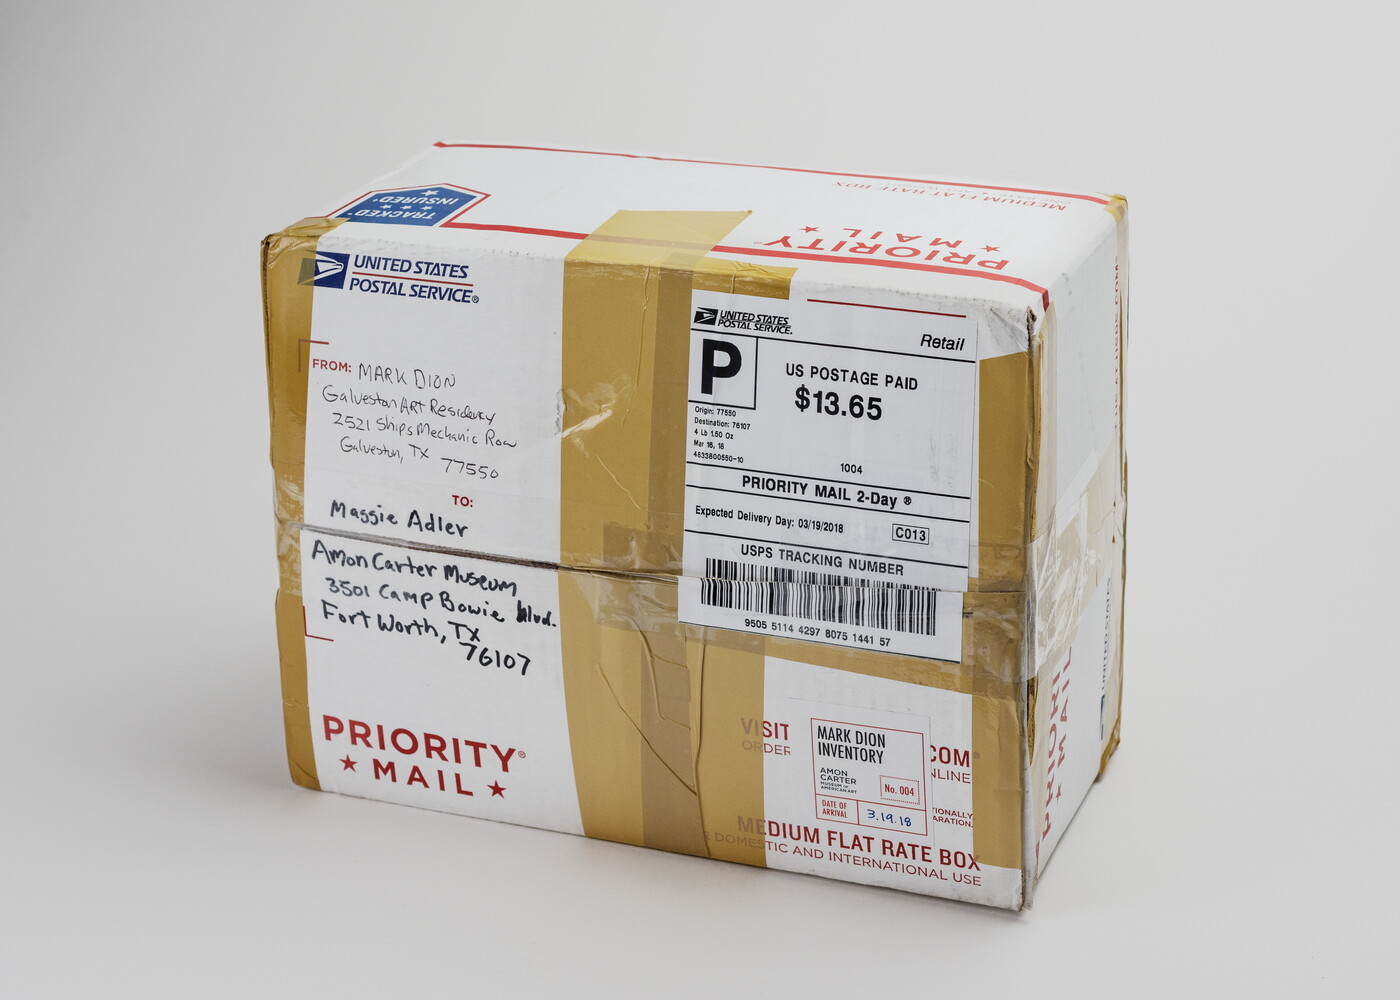 A USPS Priority Mail box covered in packing tape and a postage sticker addressed to the Carter.